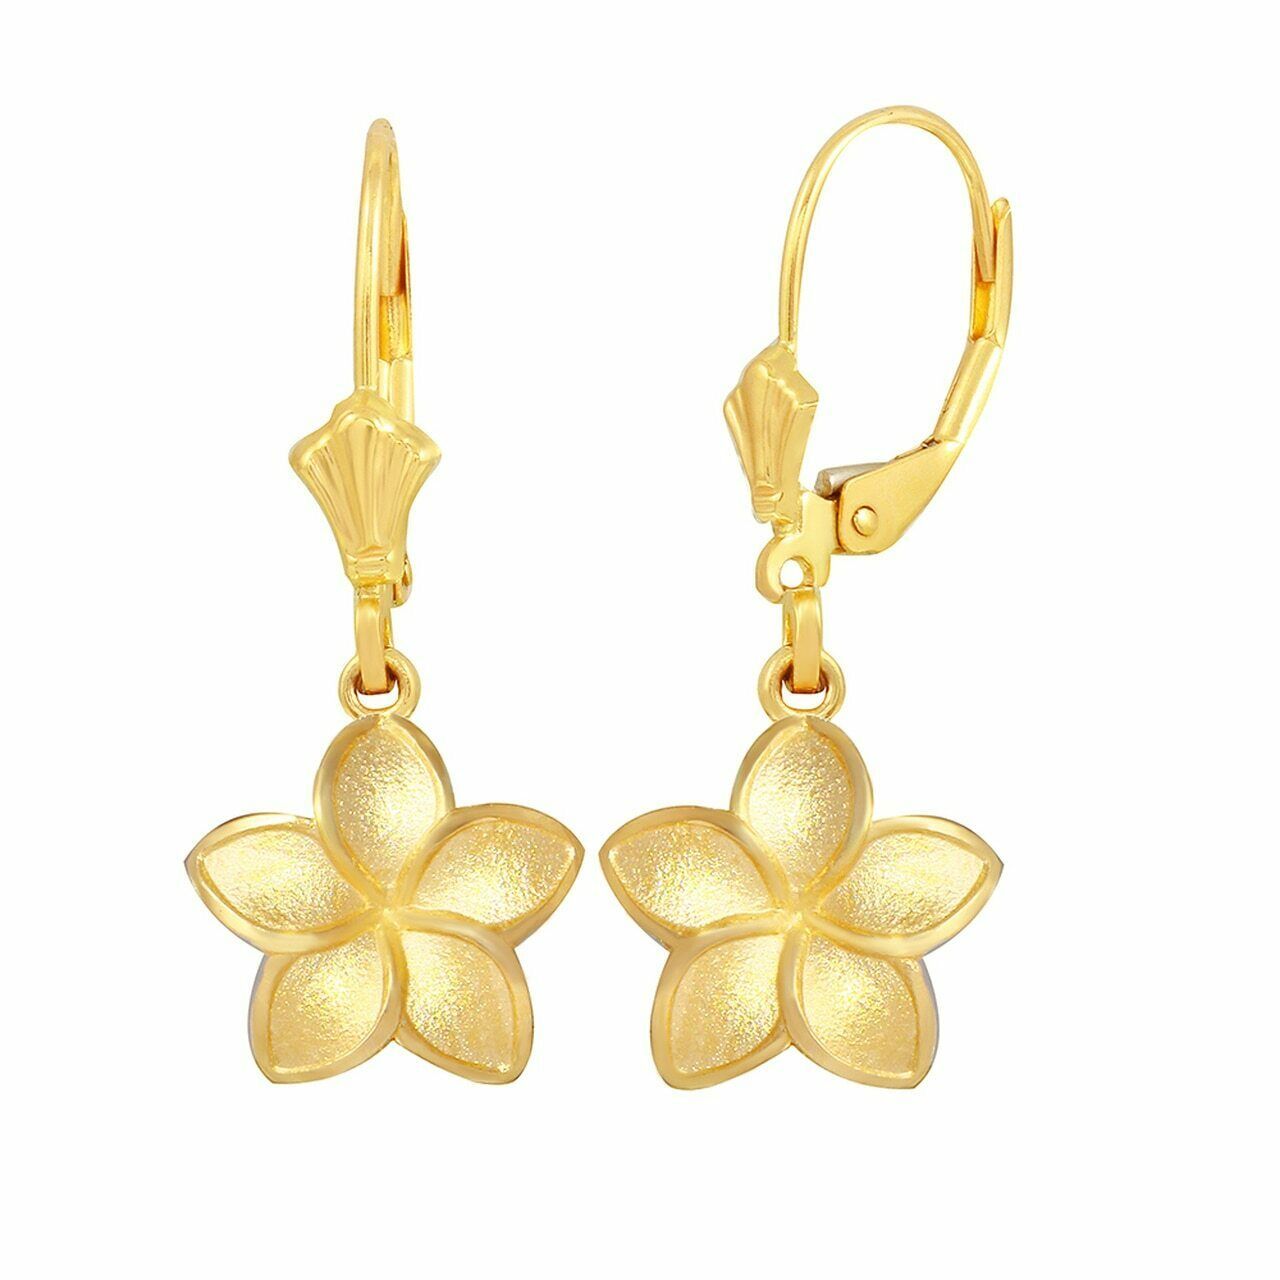 Primary image for Solid 10k / 14k Yellow Gold Small Five Petal Plumeria Flower Matte Earrings Set